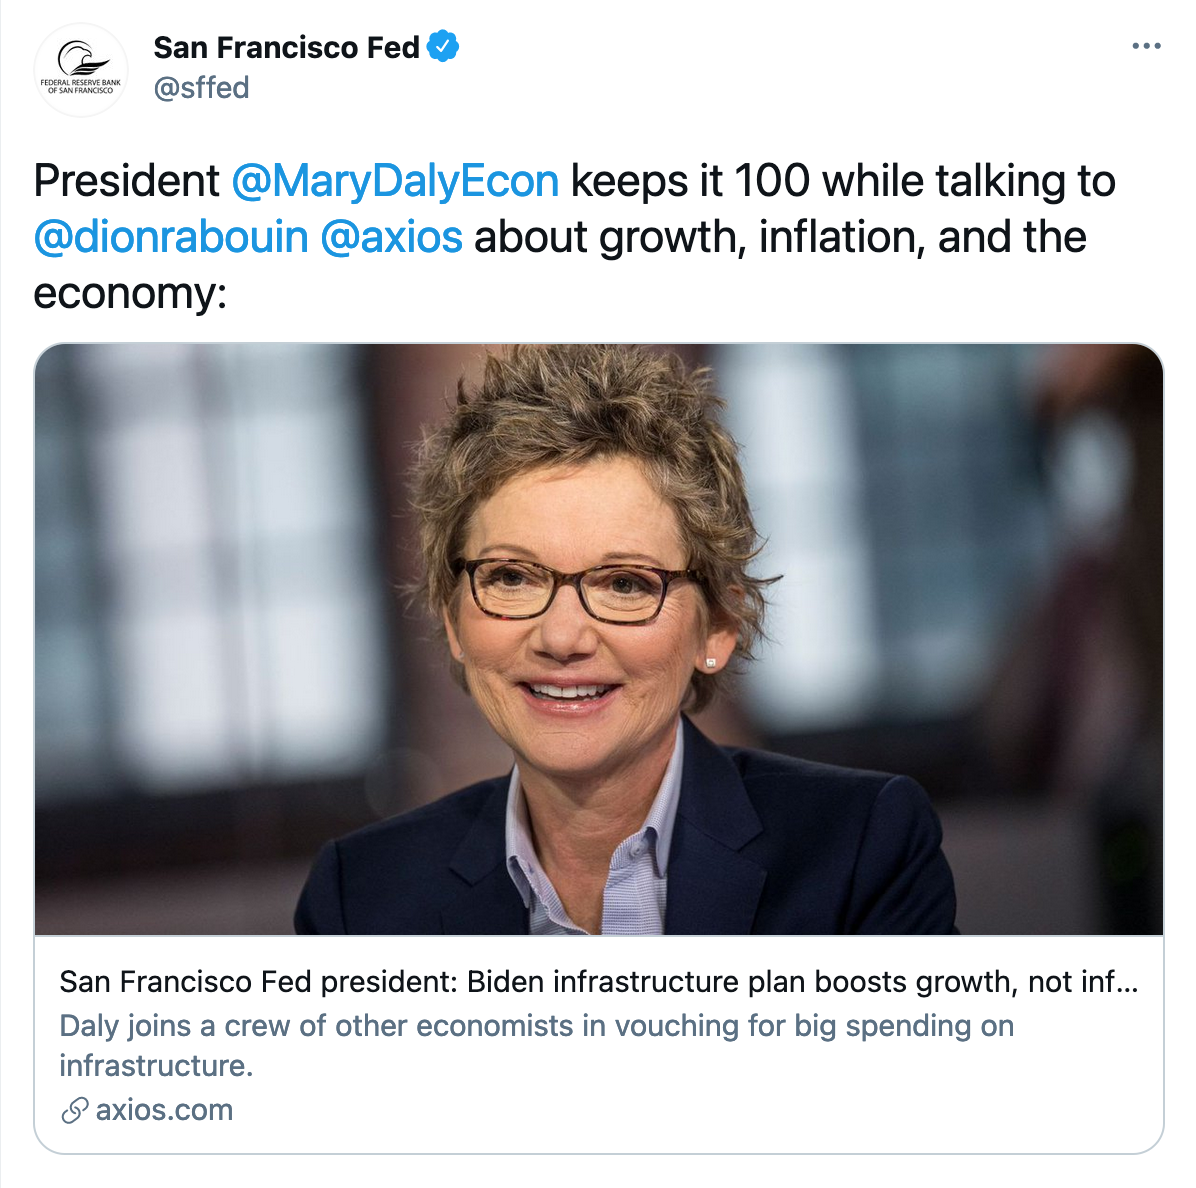 A screenshot of a tweet from the San Francisco Fed.